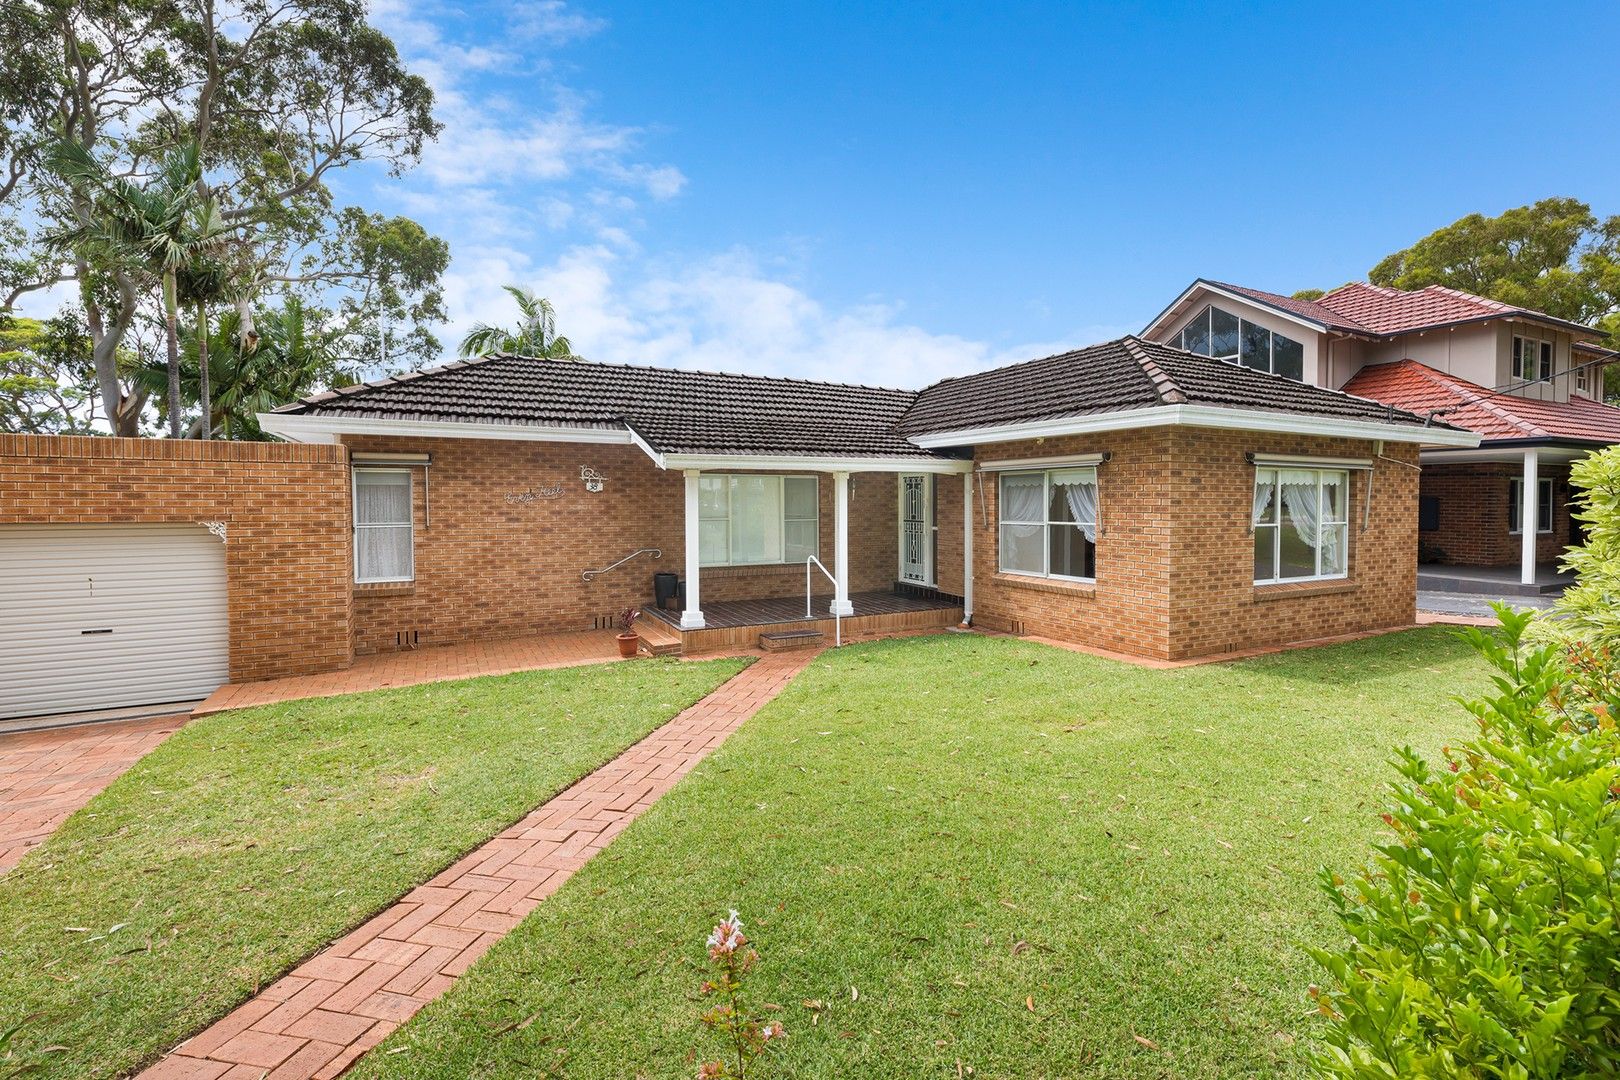 38 Coral Road, Woolooware NSW 2230, Image 0